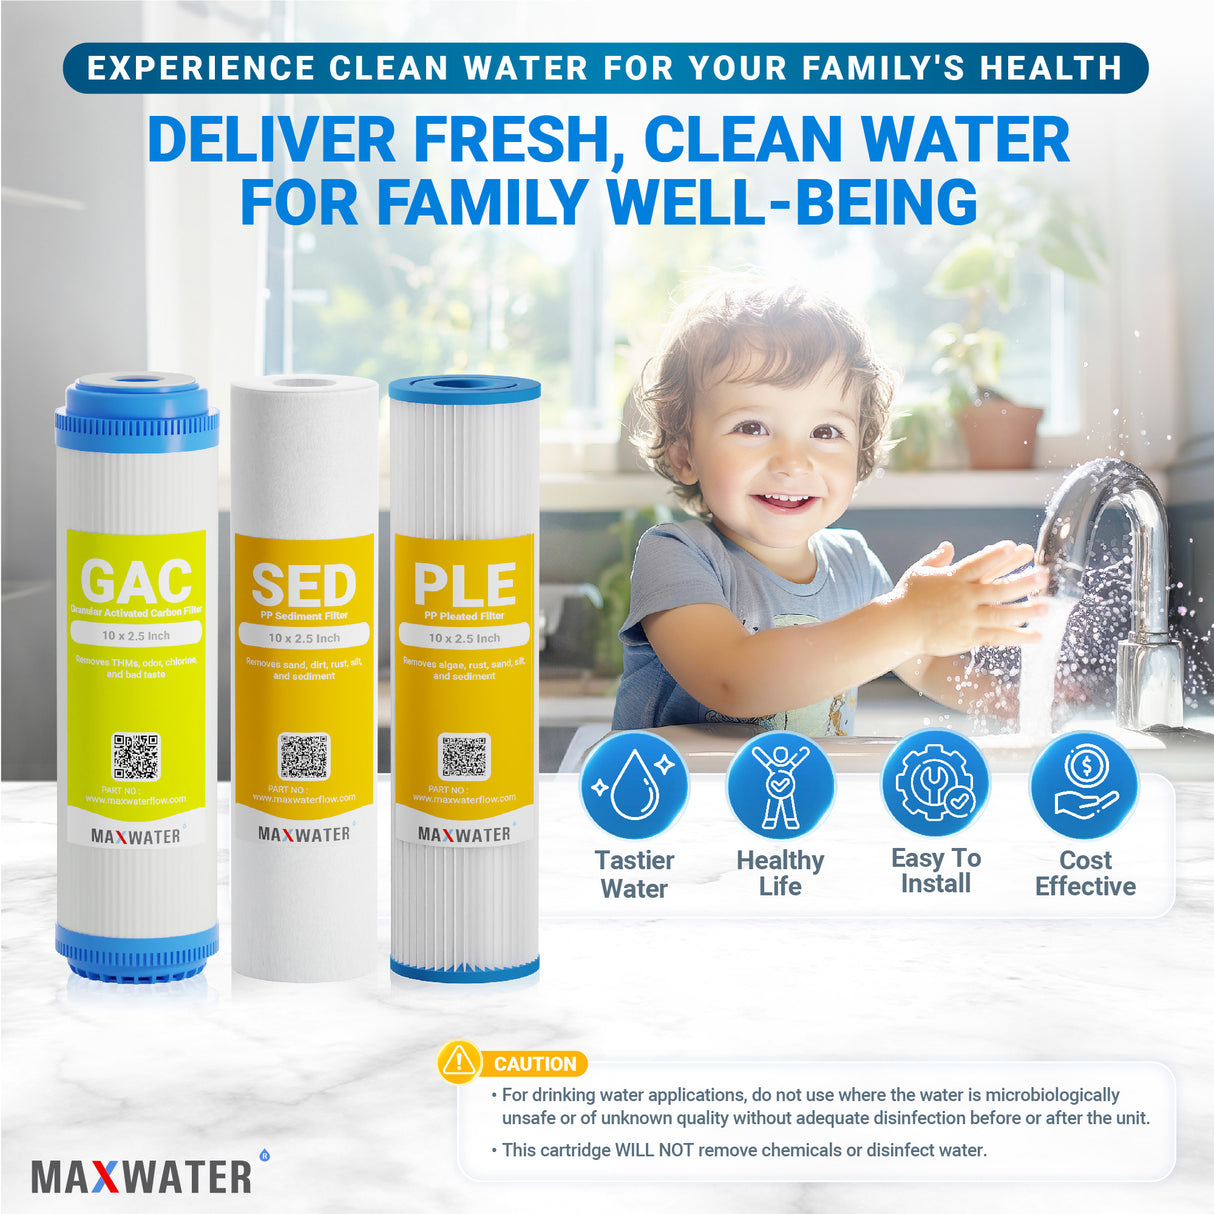 Achieve clarity and freshness with pleated sediment and GAC filter replacement cartridge